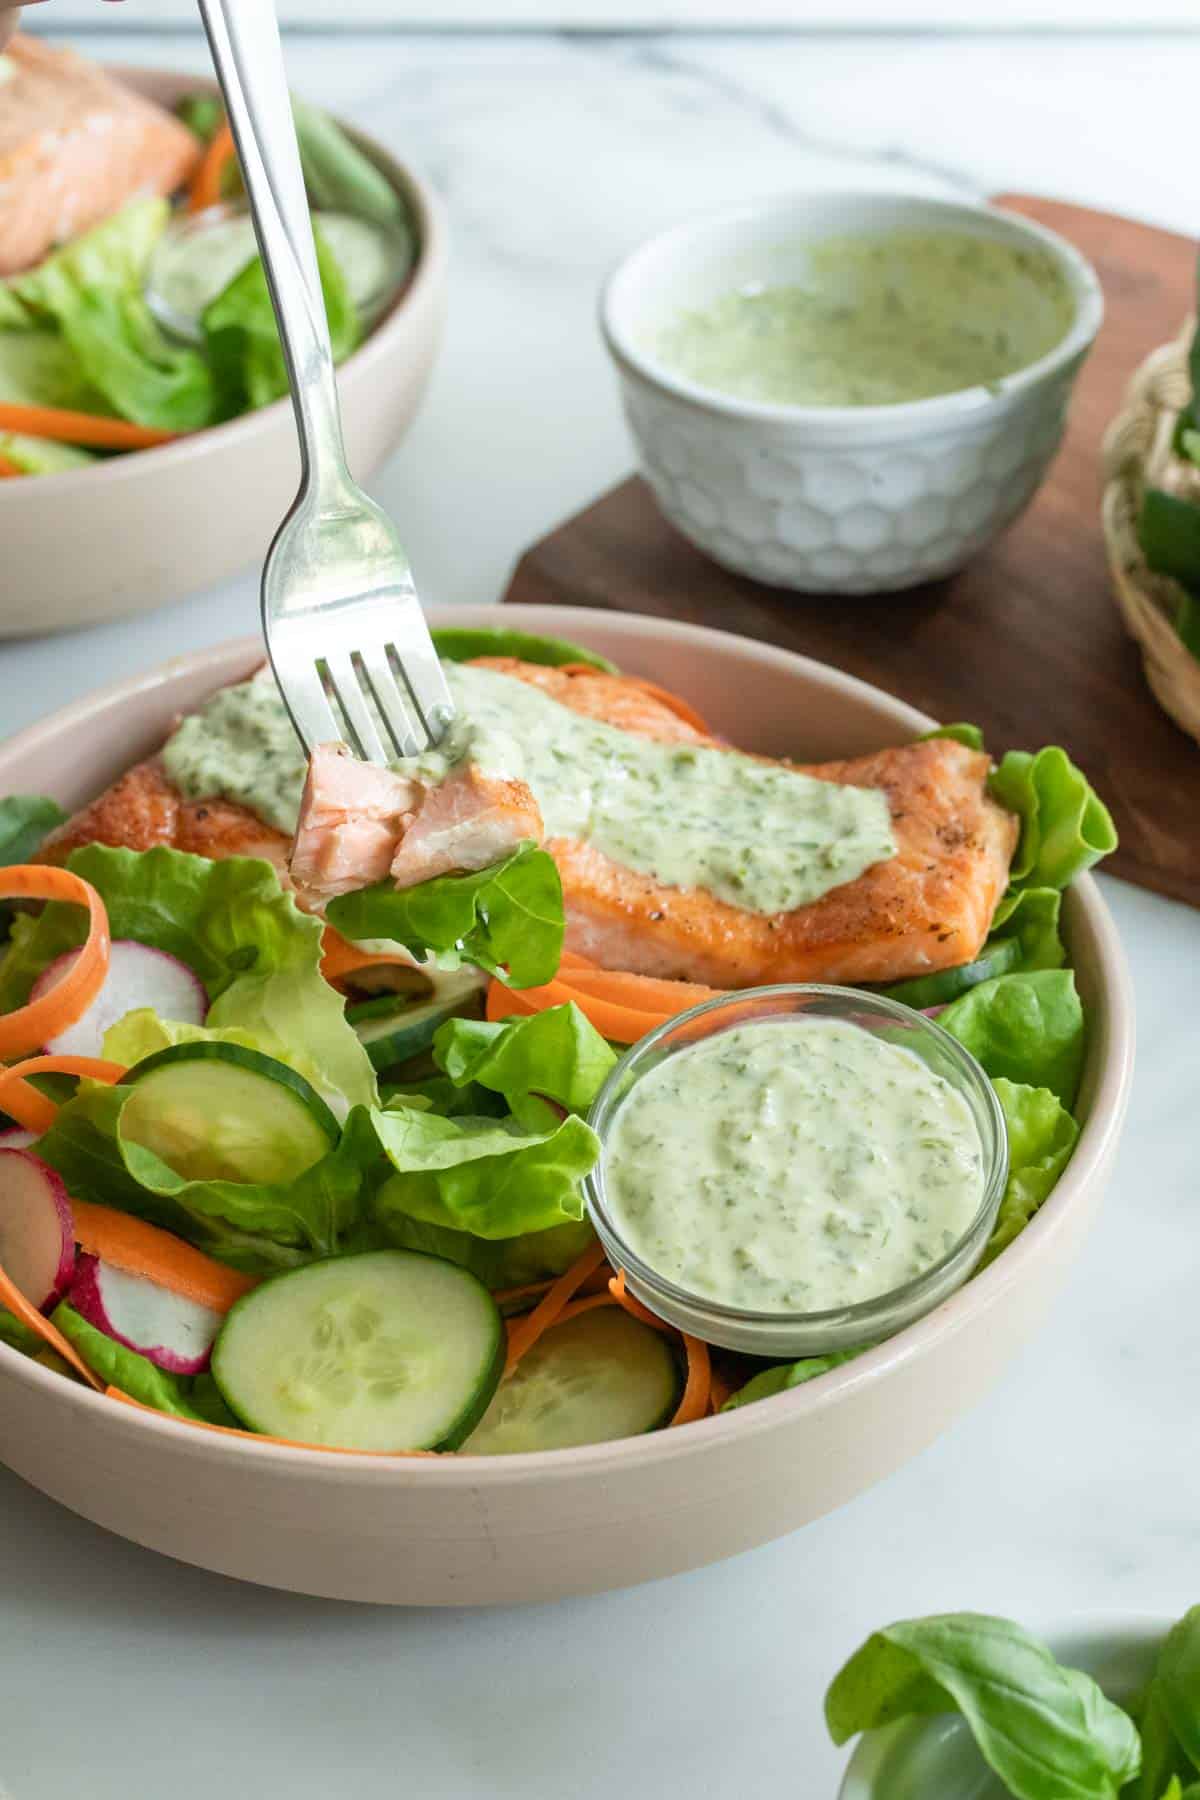 A fork dipping into a salad with cucumbers, salmon, and a creamy dressing.